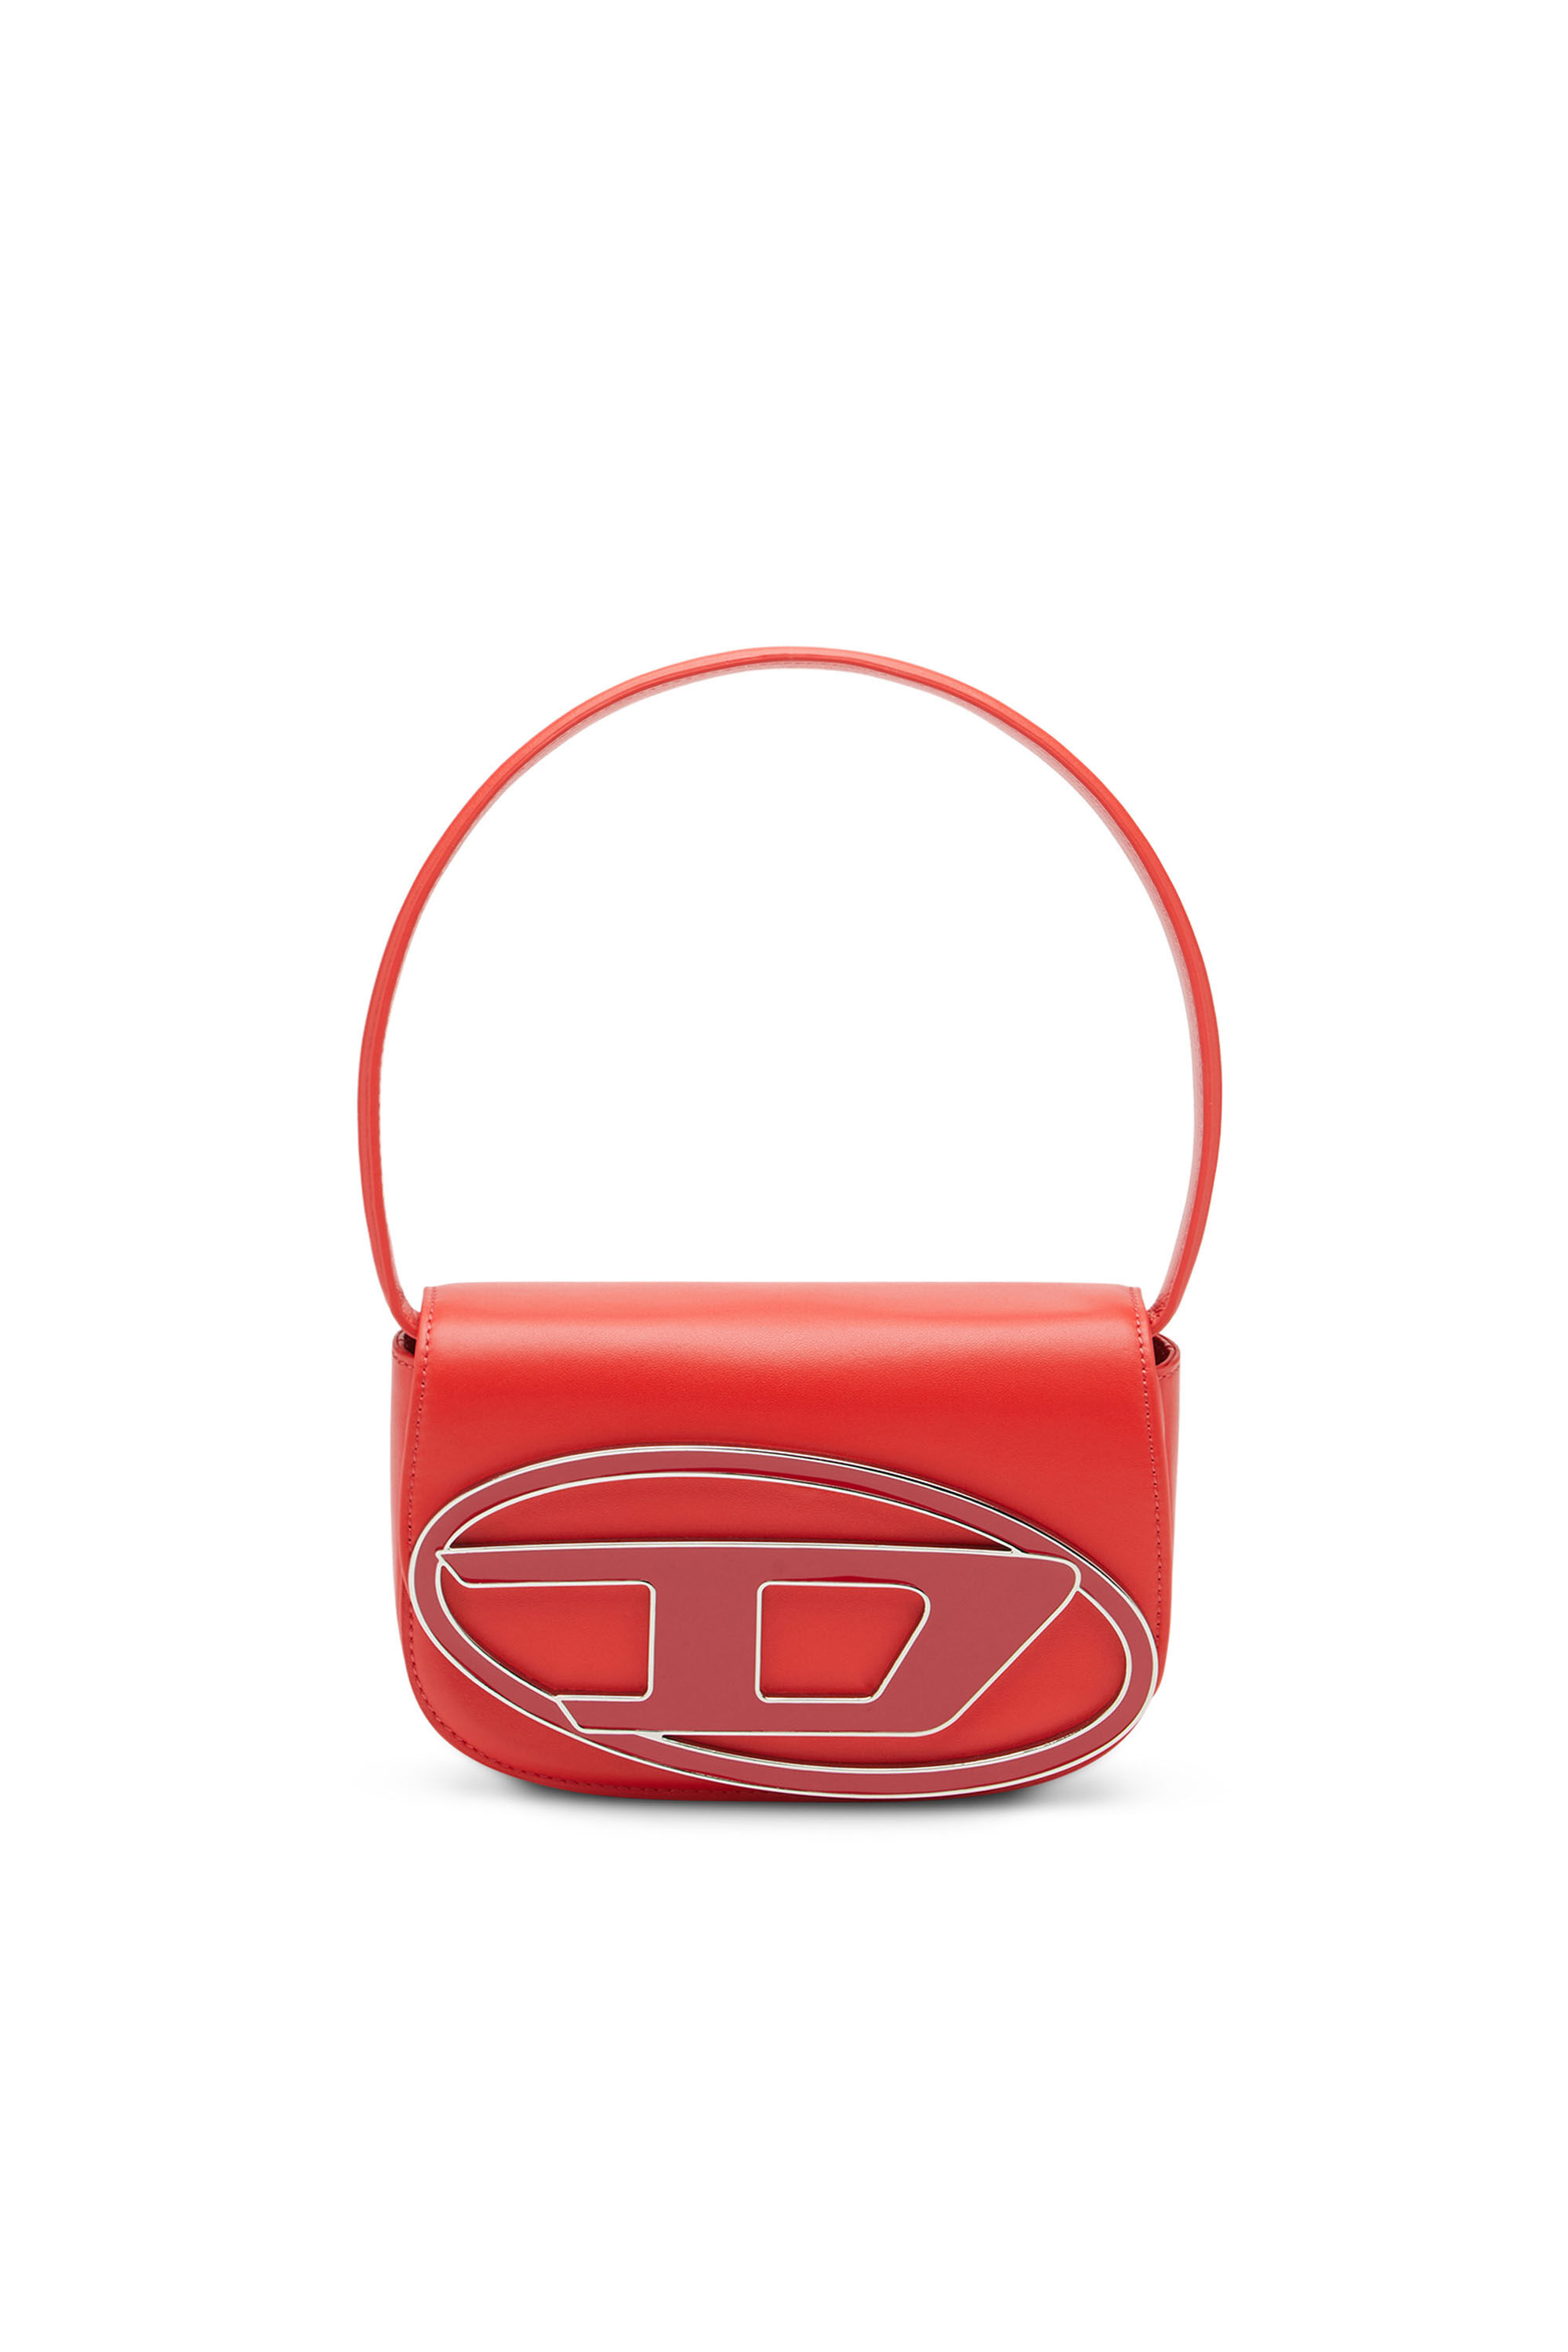 Women's 1DR-Iconic shoulder bag in nappa leather | Red | Diesel